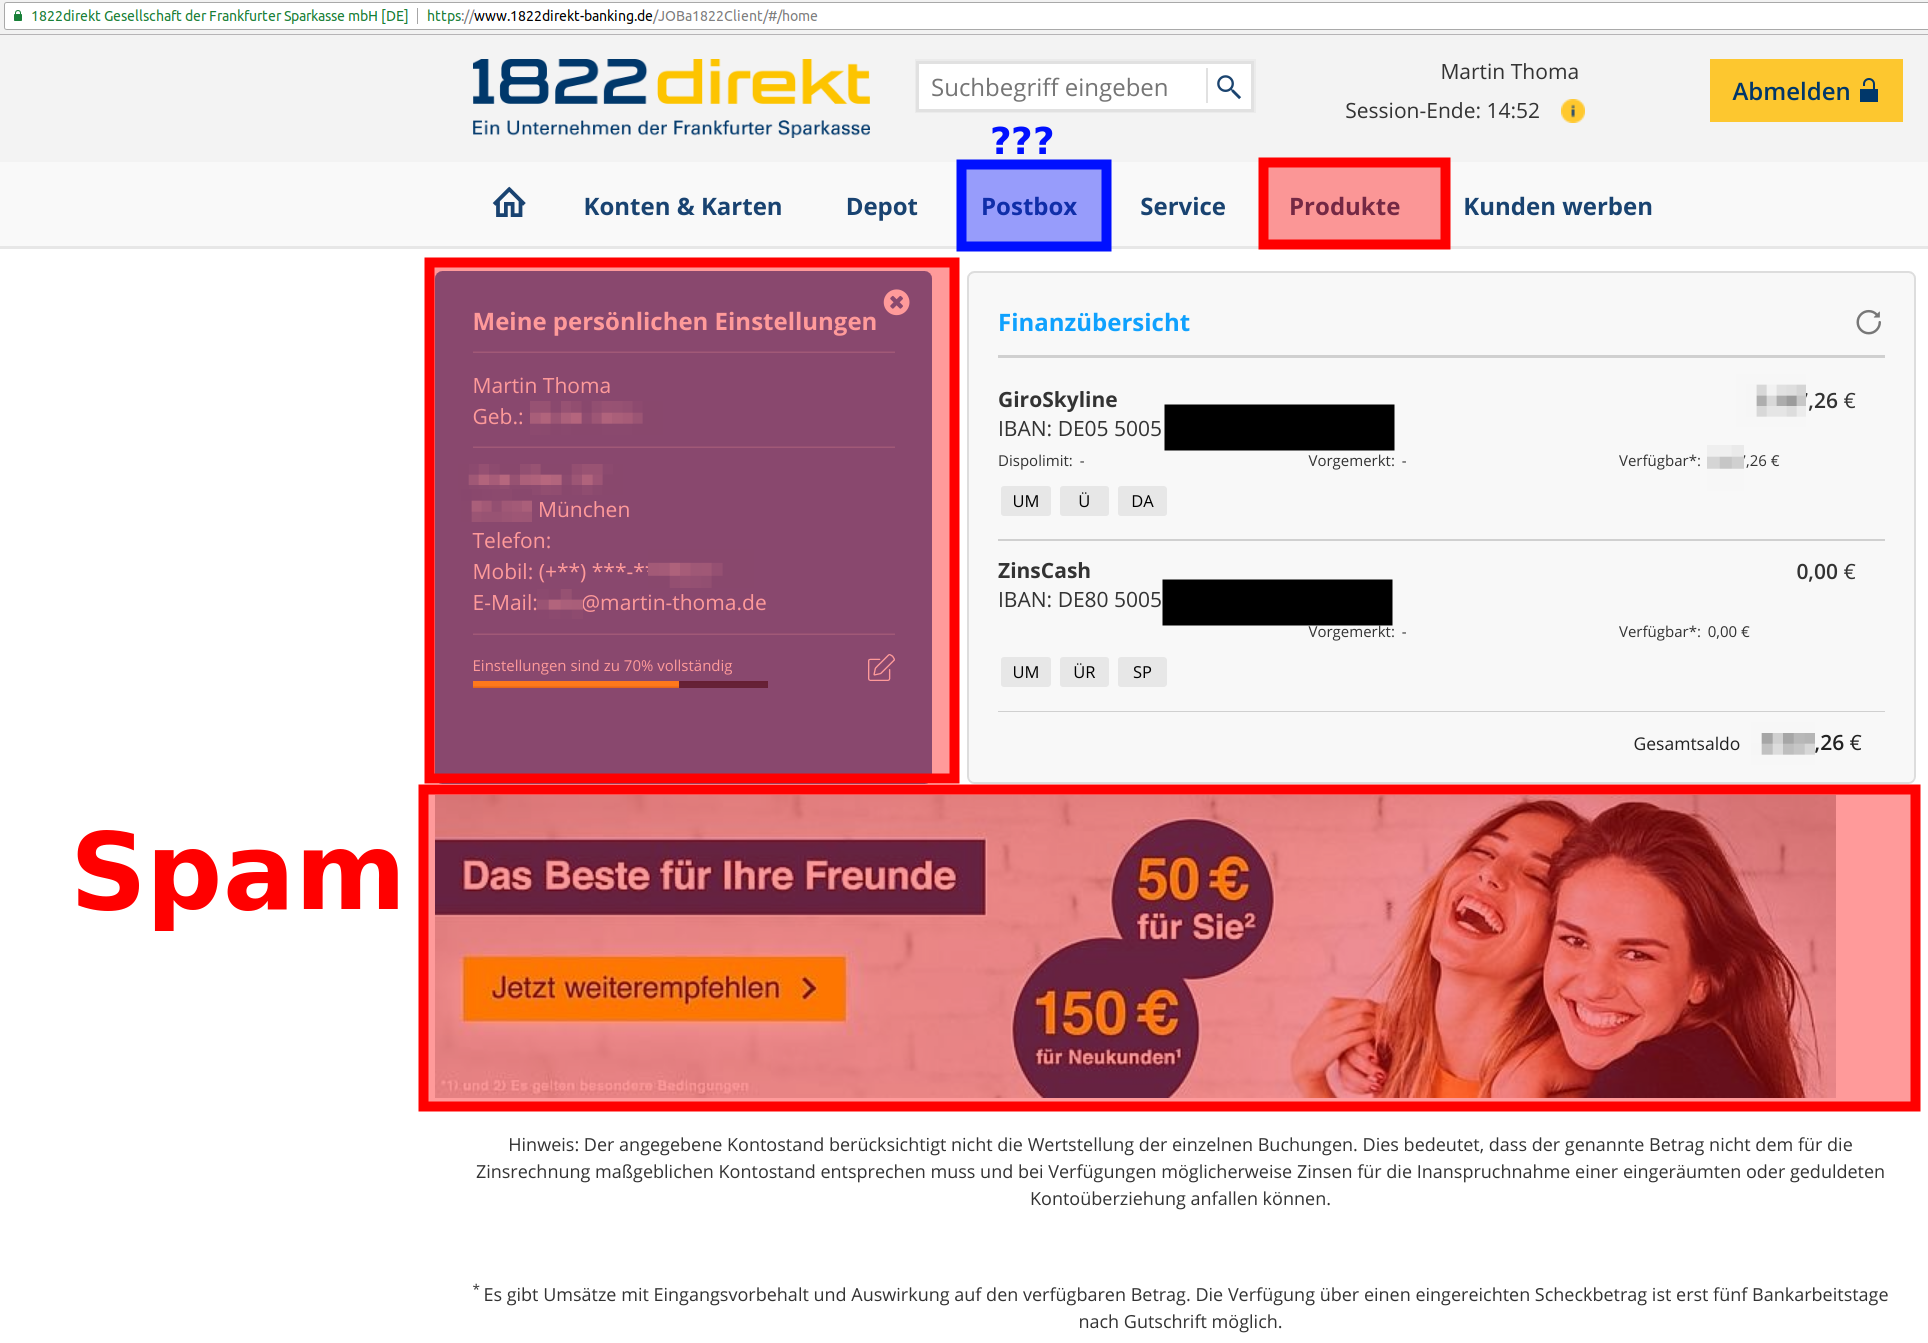 1822direkt shows this as a first page after login